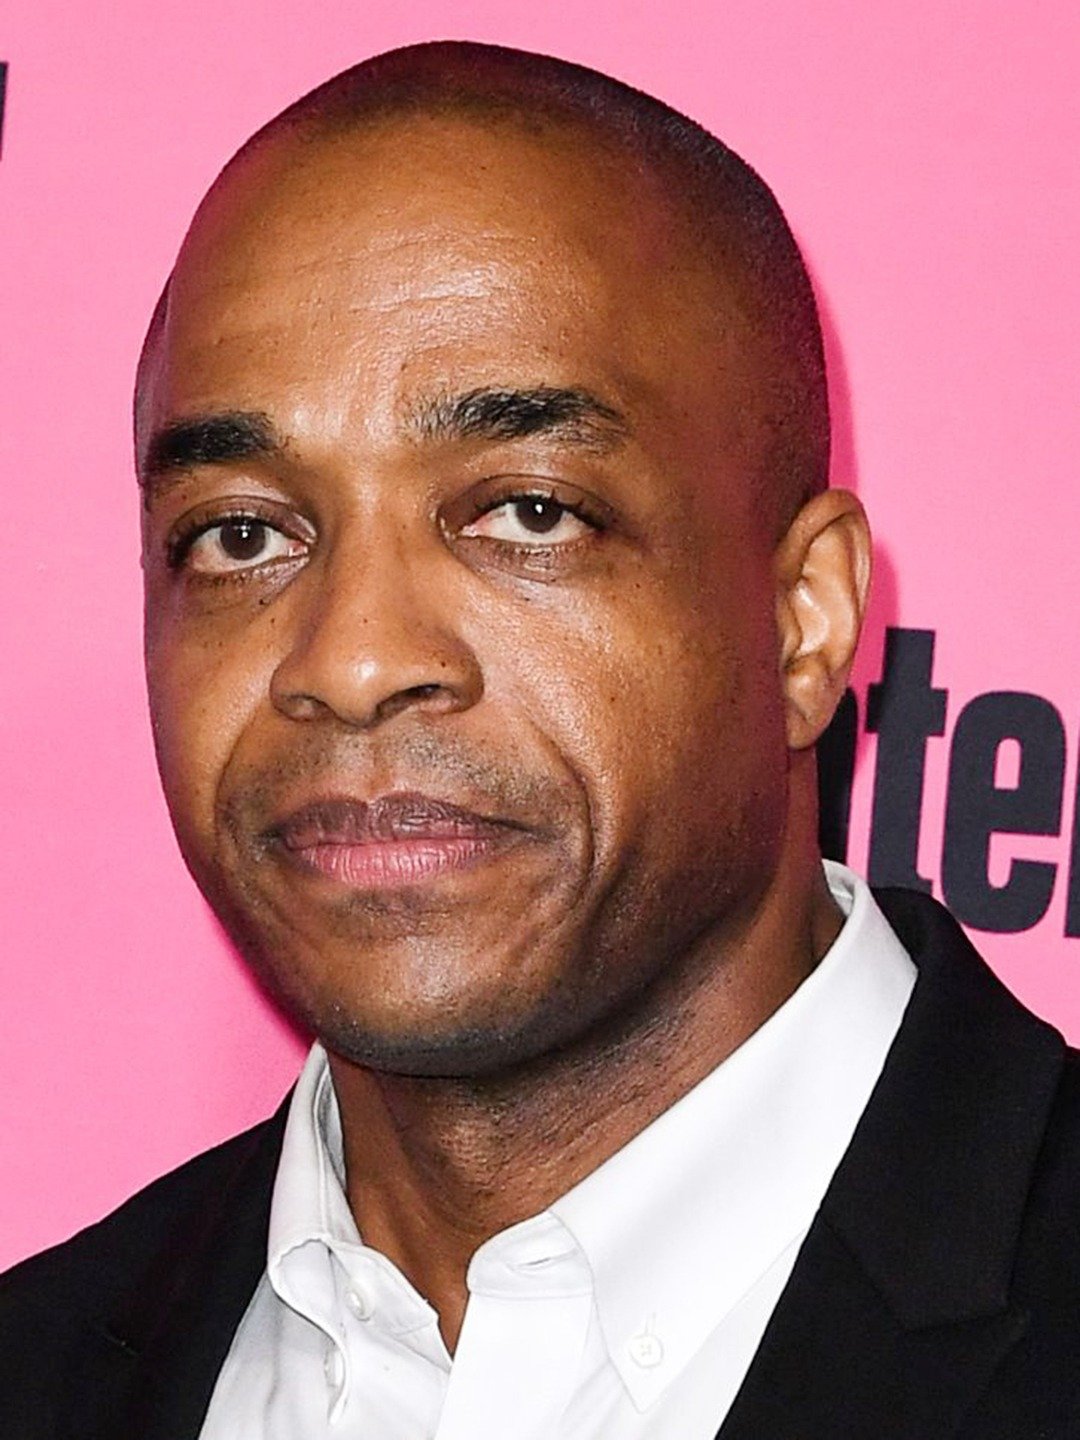 How tall is Rick Worthy?